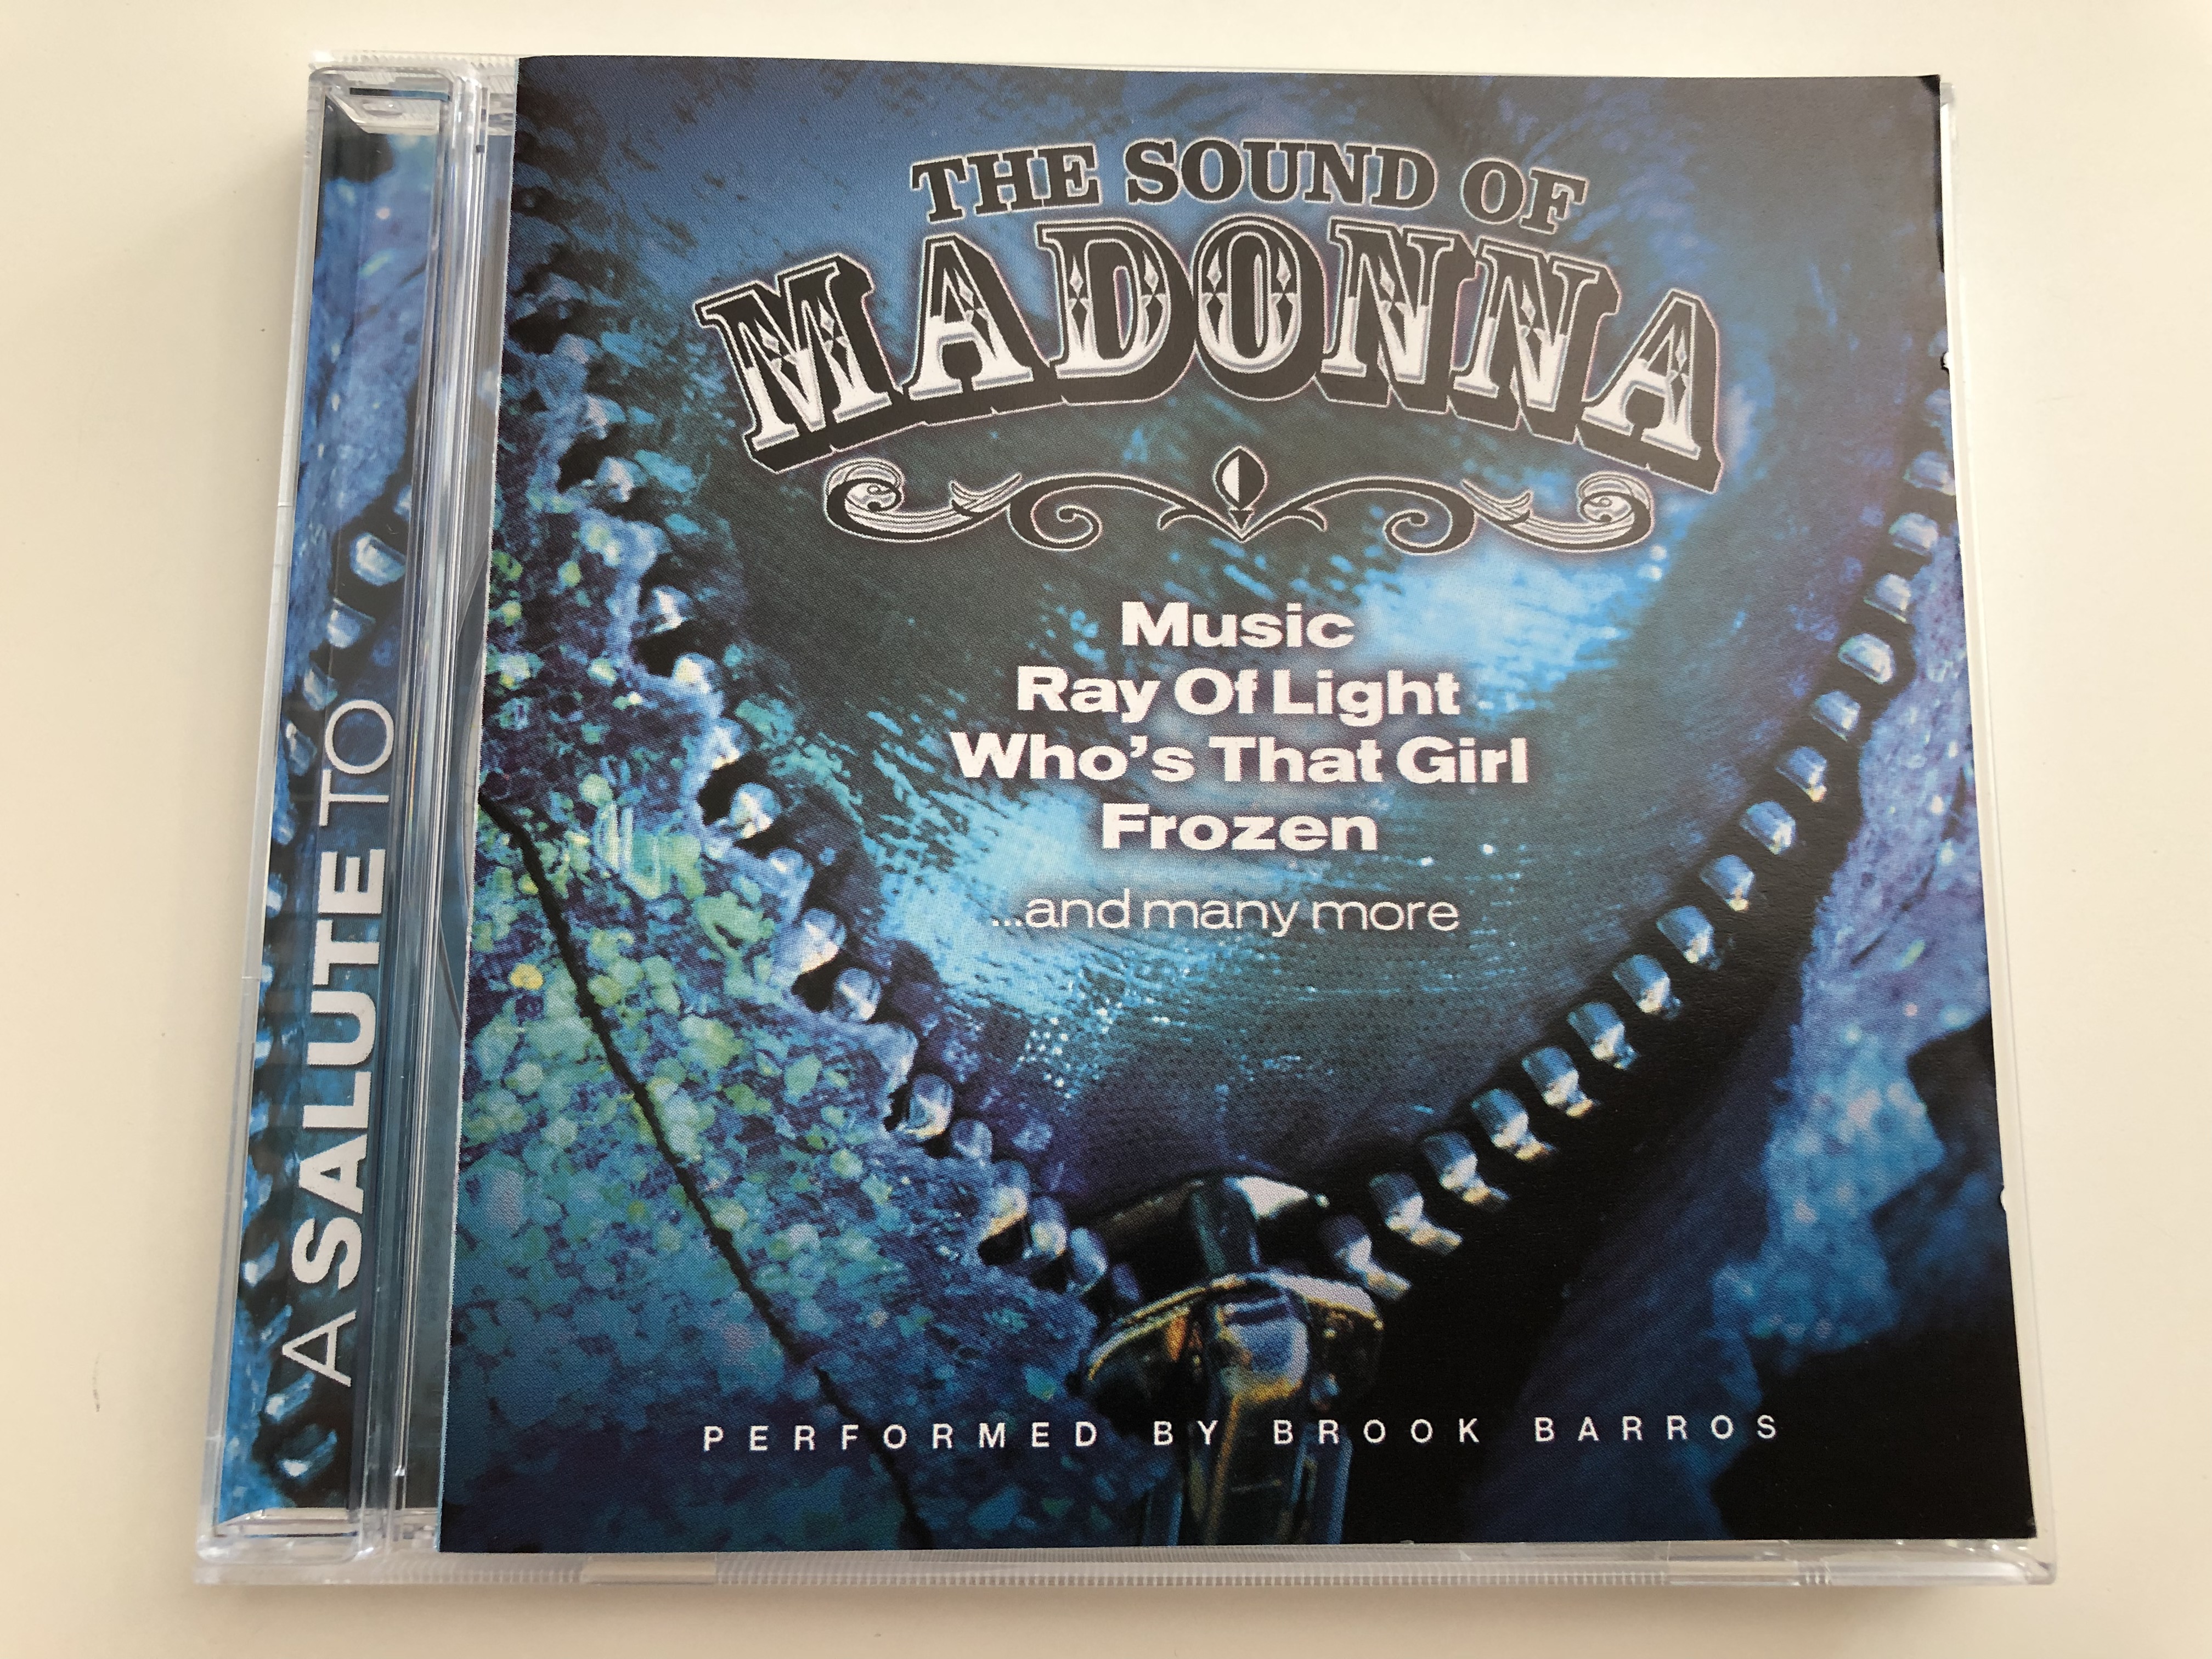 the-sound-of-madonna-music-ray-of-light-who-s-that-girl-frozen-and-many-more-performed-by-brook-barros-audio-cd-2002-galaxy-3822322-1-.jpg